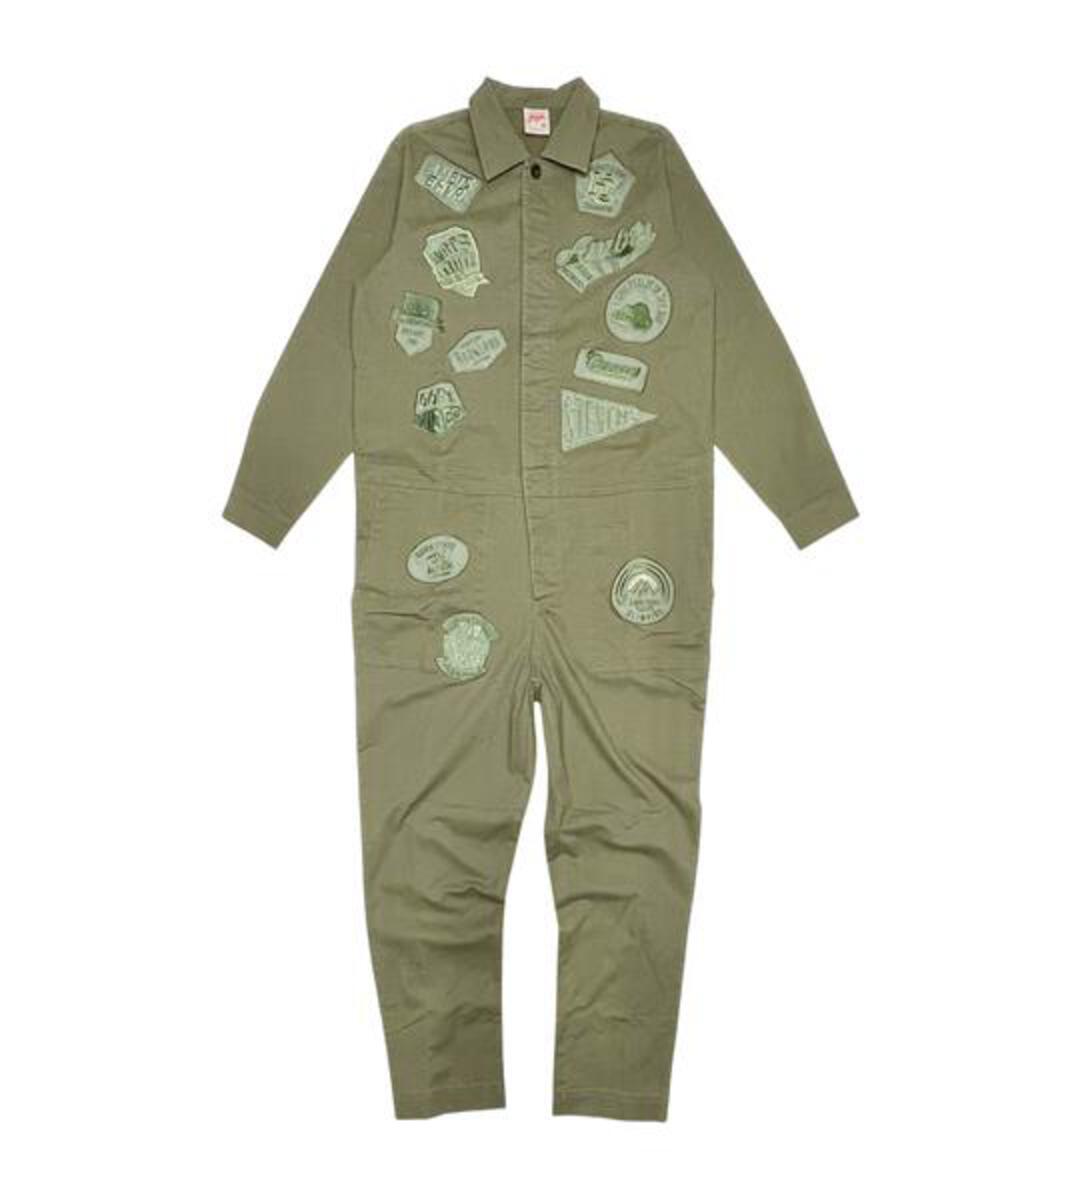 Men, Boys, Teens, Gifts, Wmns, Girls, Urban, Style, Fashion, Ambit Patchwork Overalls, Army, Olive Green, Ambit, Jumper, Patches, 